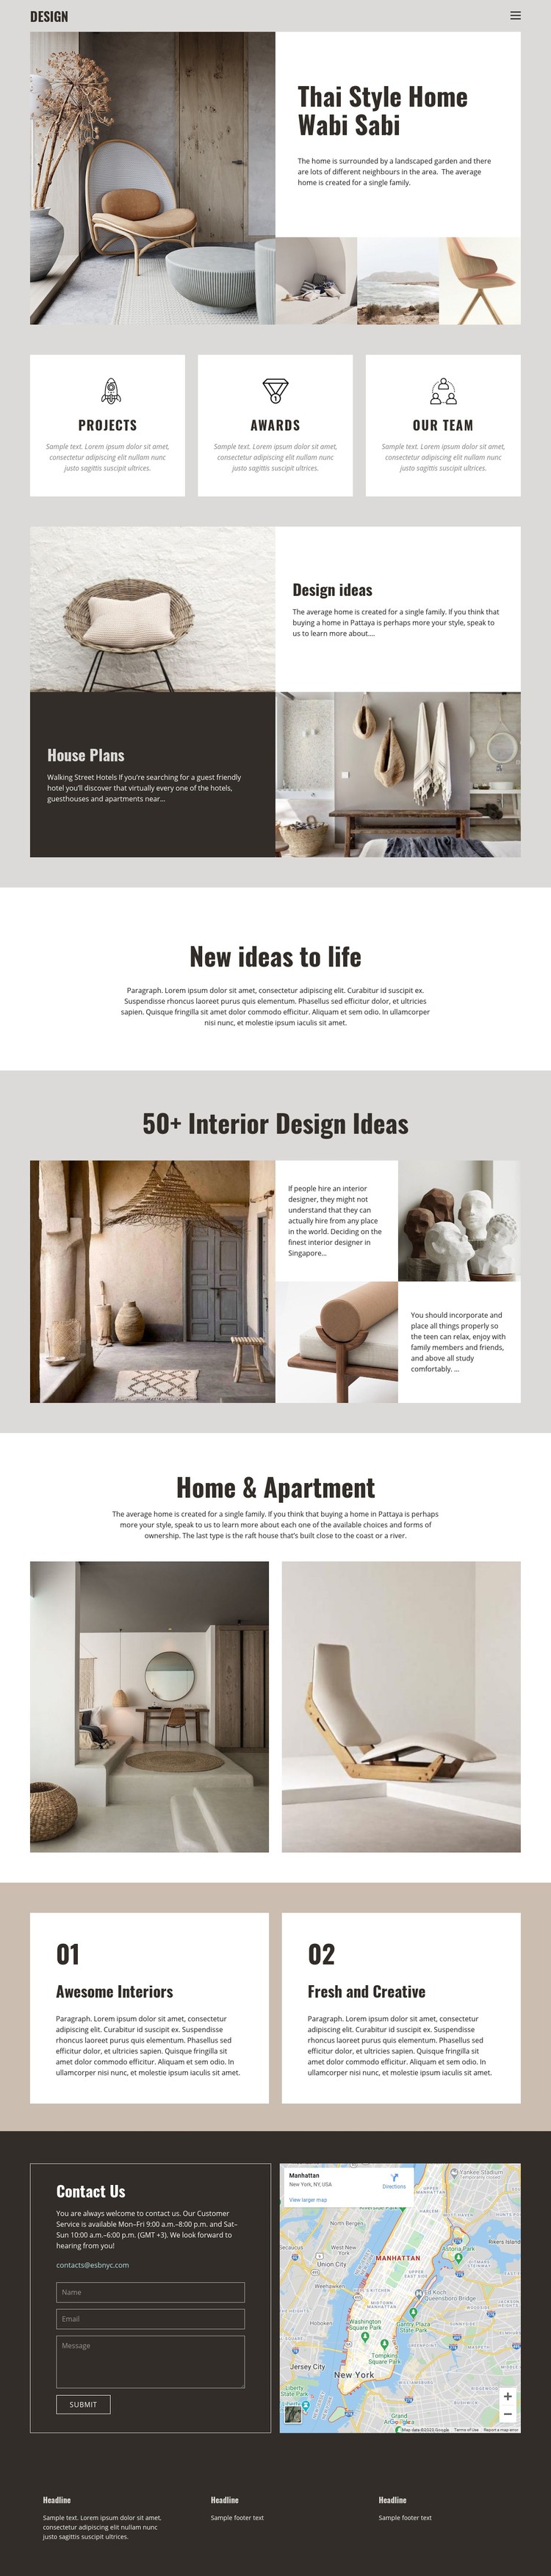 Home Design For Mac Download